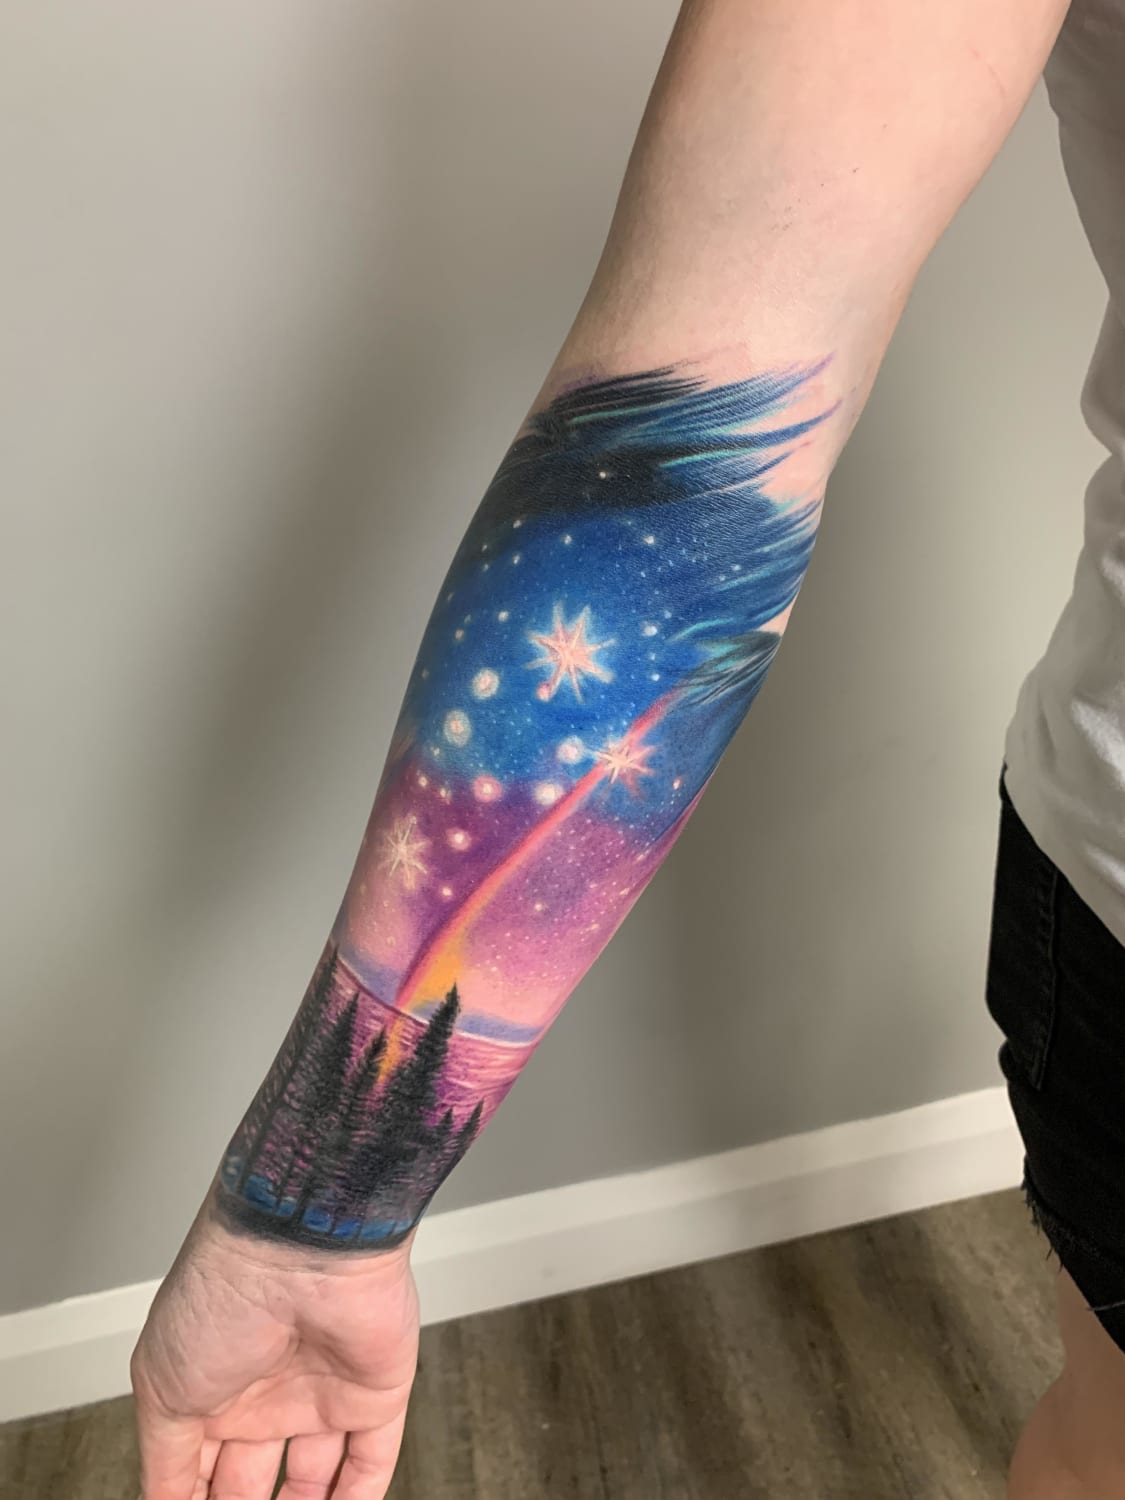 Beautiful cover up done by Jordan Chin at Sage Tattoo Gallery in Ottawa, Ont.